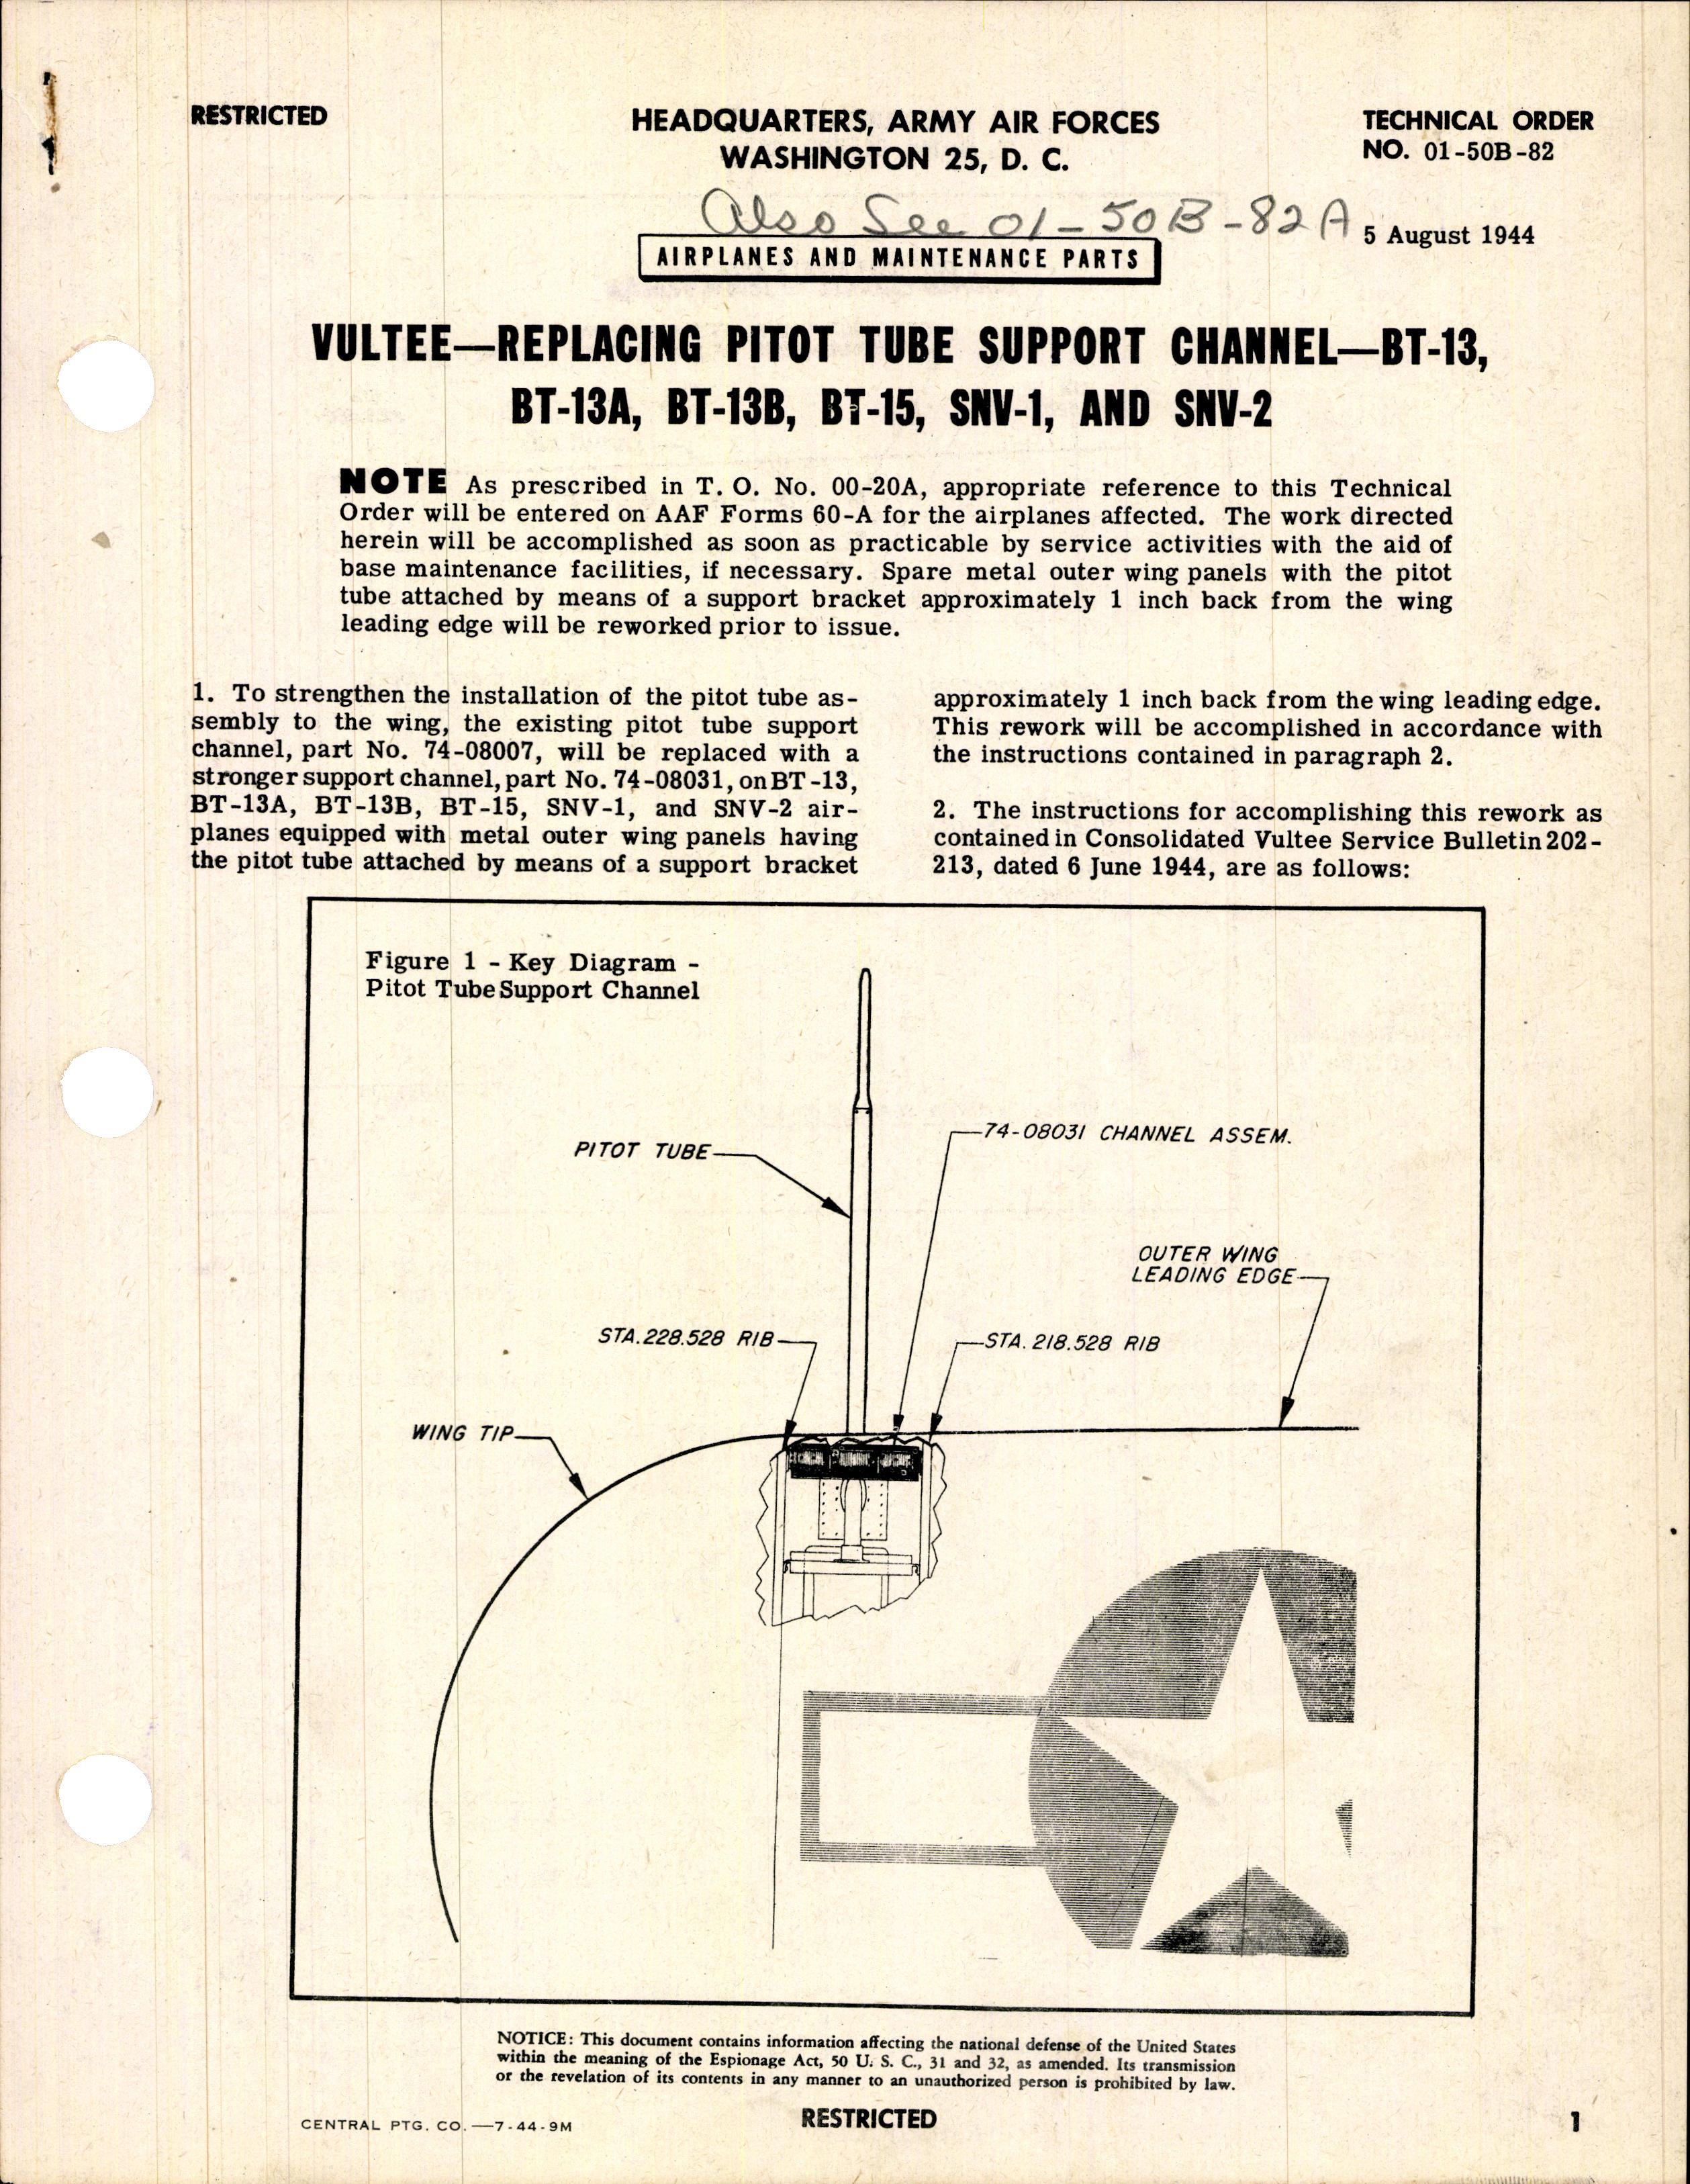 Sample page 1 from AirCorps Library document: Replacing Pitot Tube Support Channel - BT-13, BT-13A, BT-13B, BT-15, SNV-1, and SNV-2